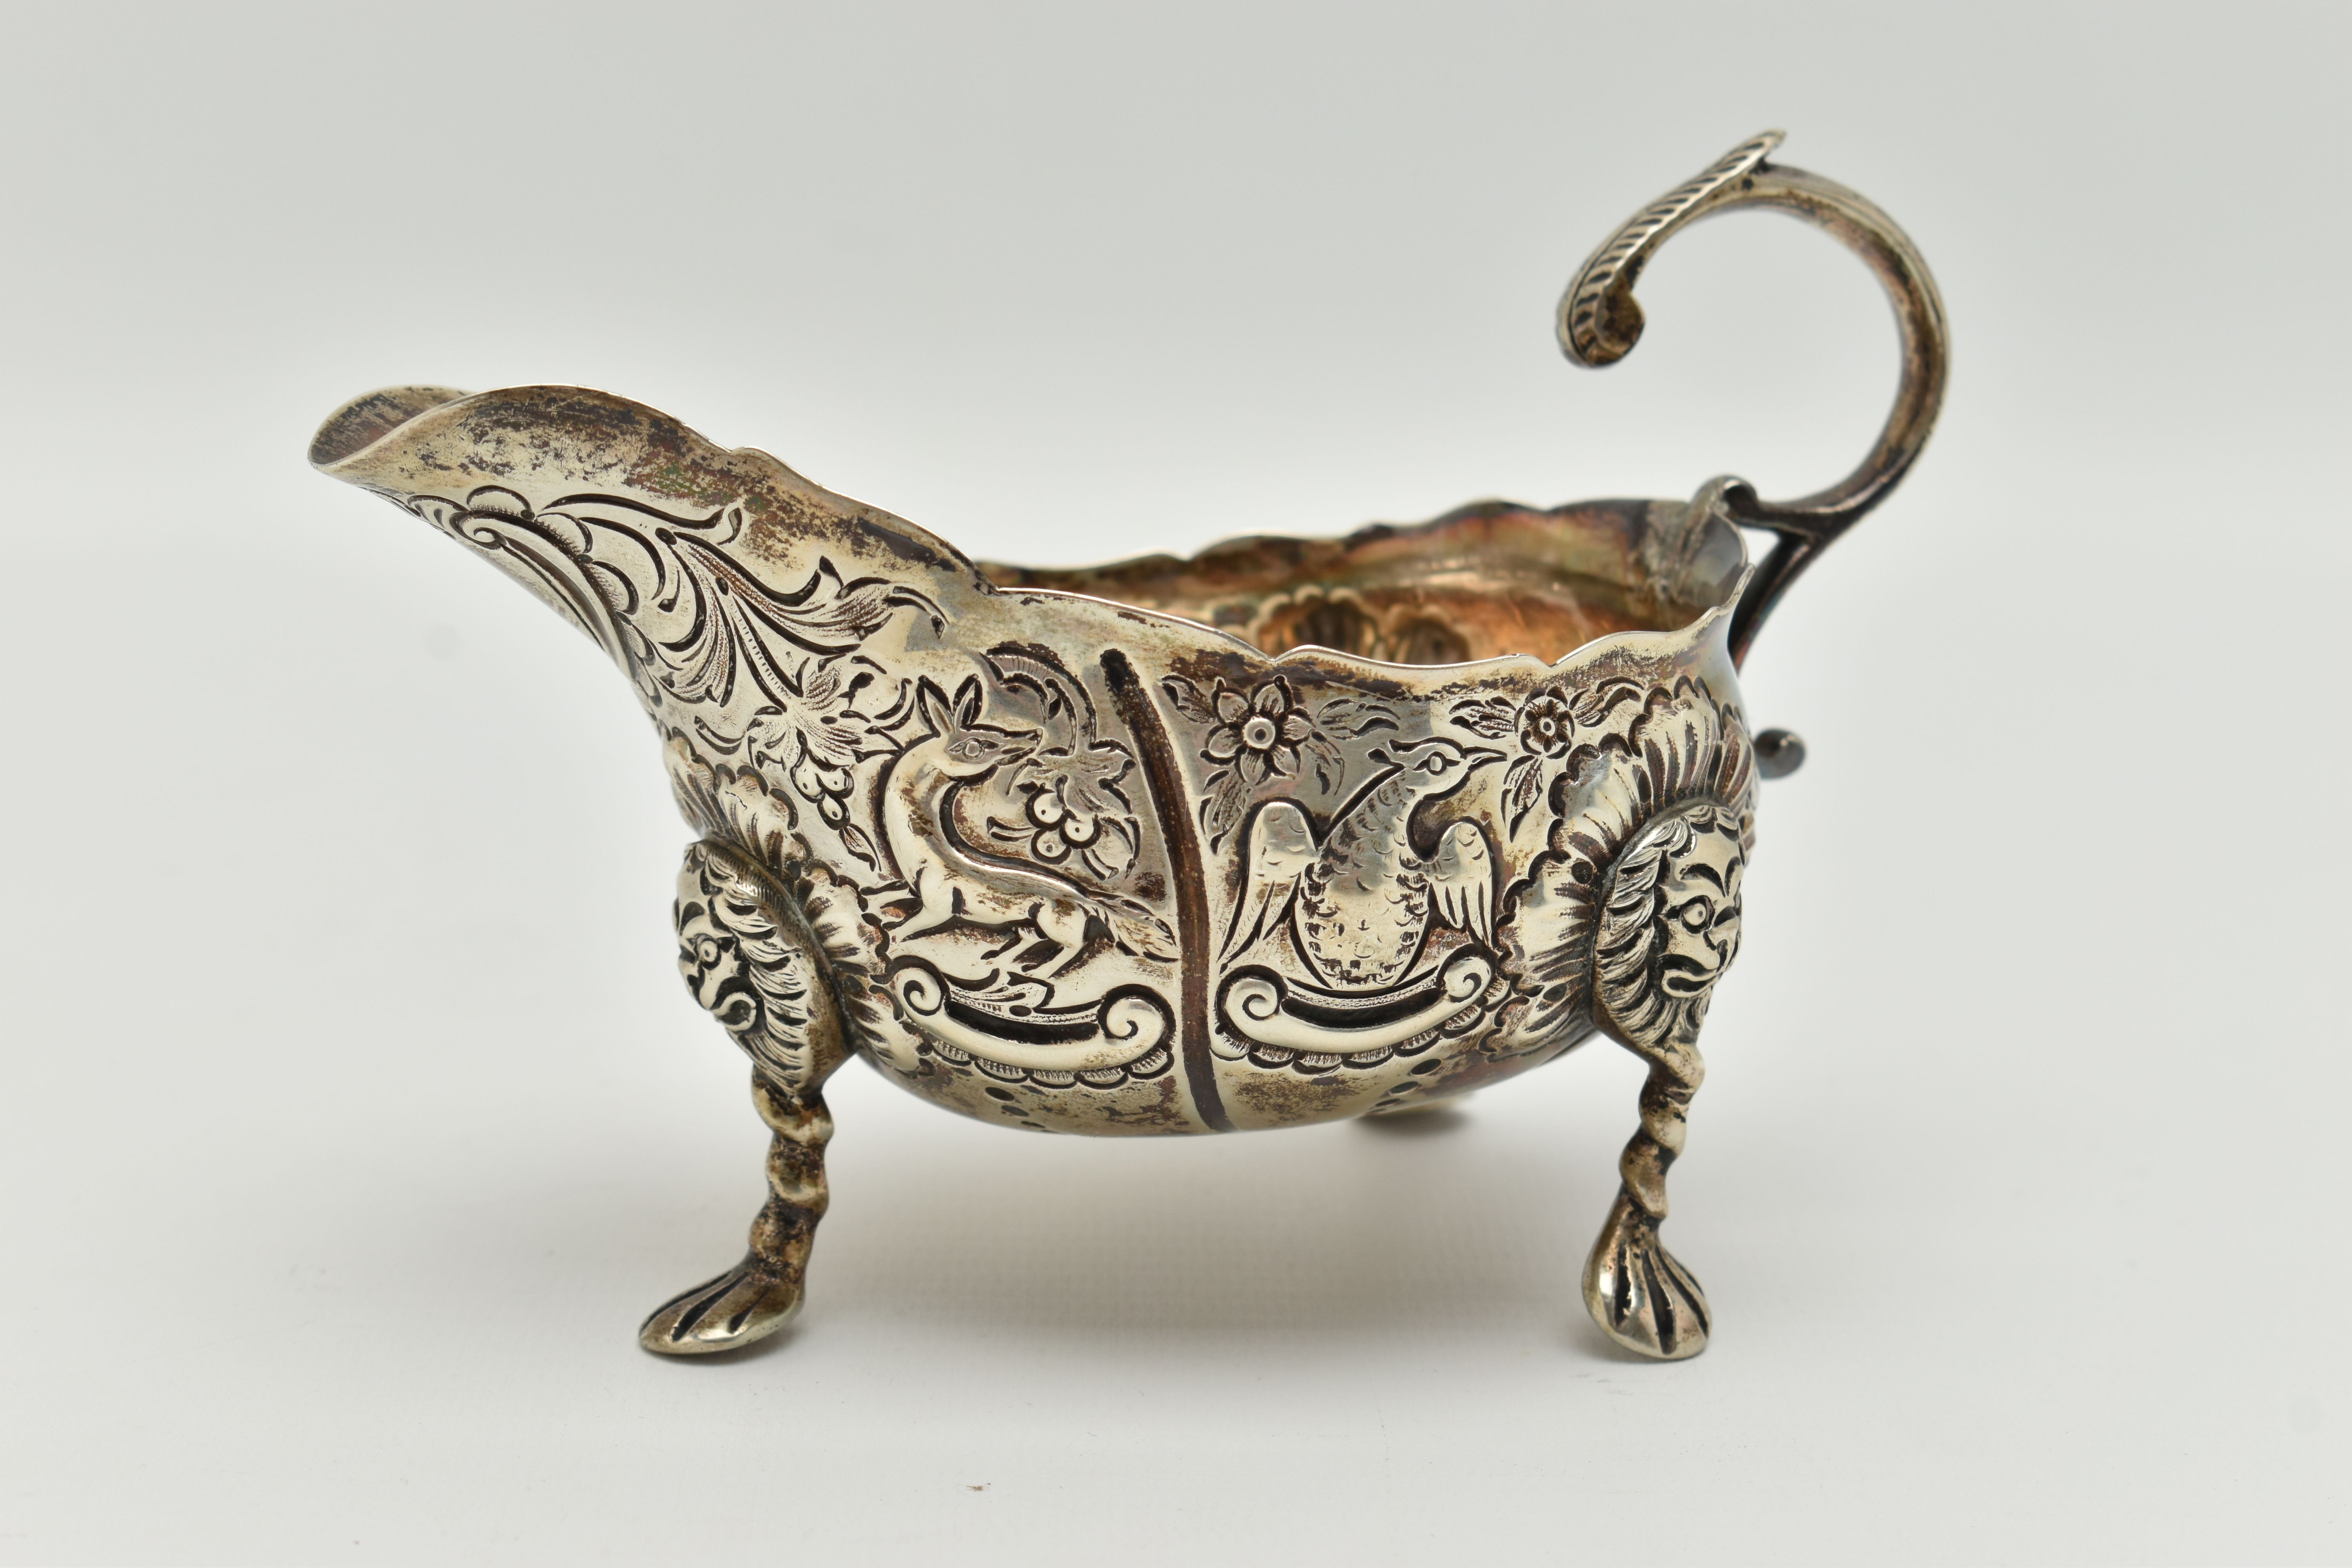 AN IRISH SILVER GRAVY BOAT, early 20th century, embossed animal and floral pattern, with three